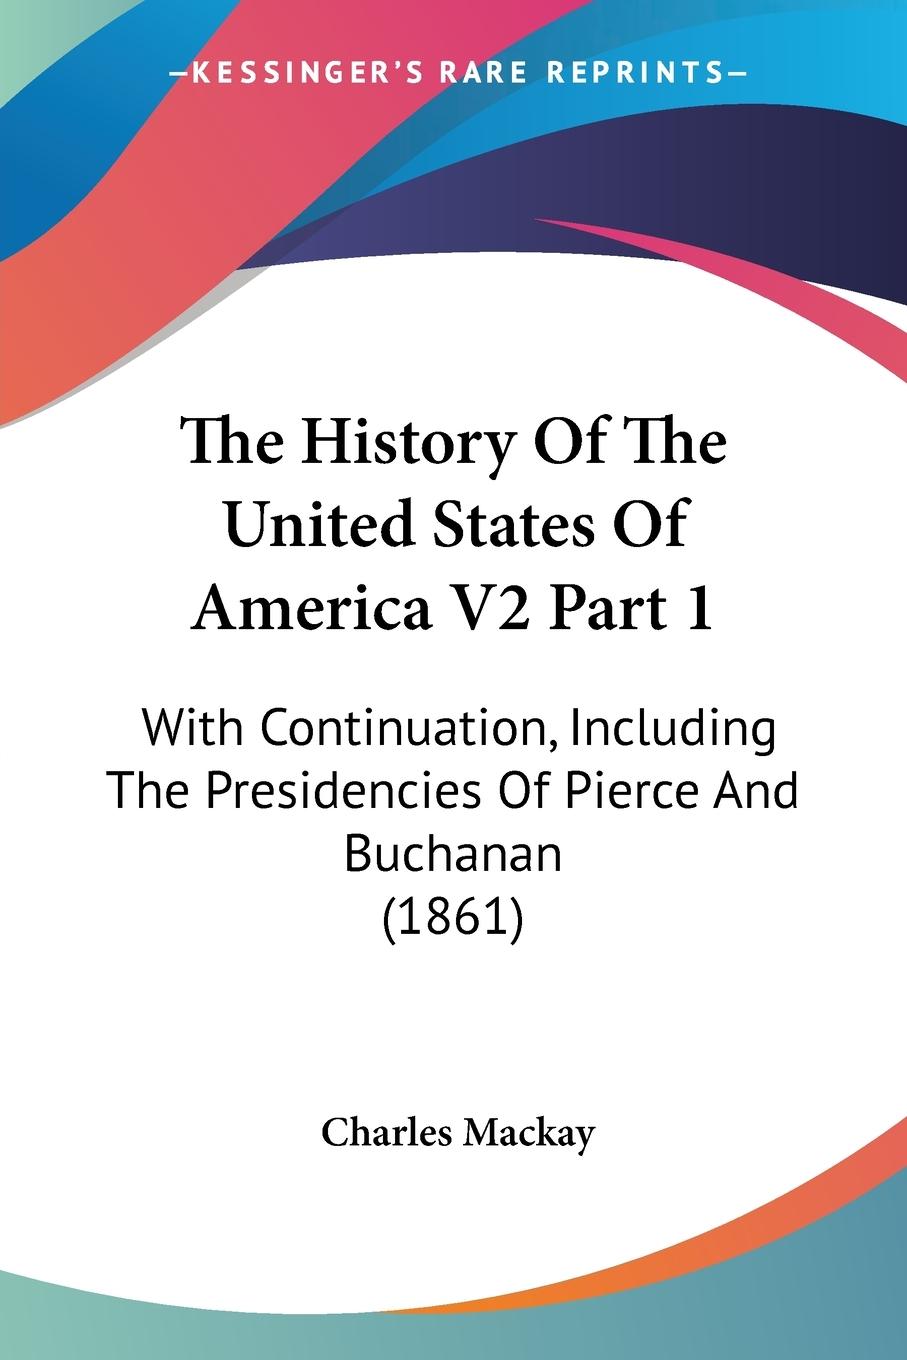 The History Of The United States Of America V2 Part 1 - Mackay, Charles